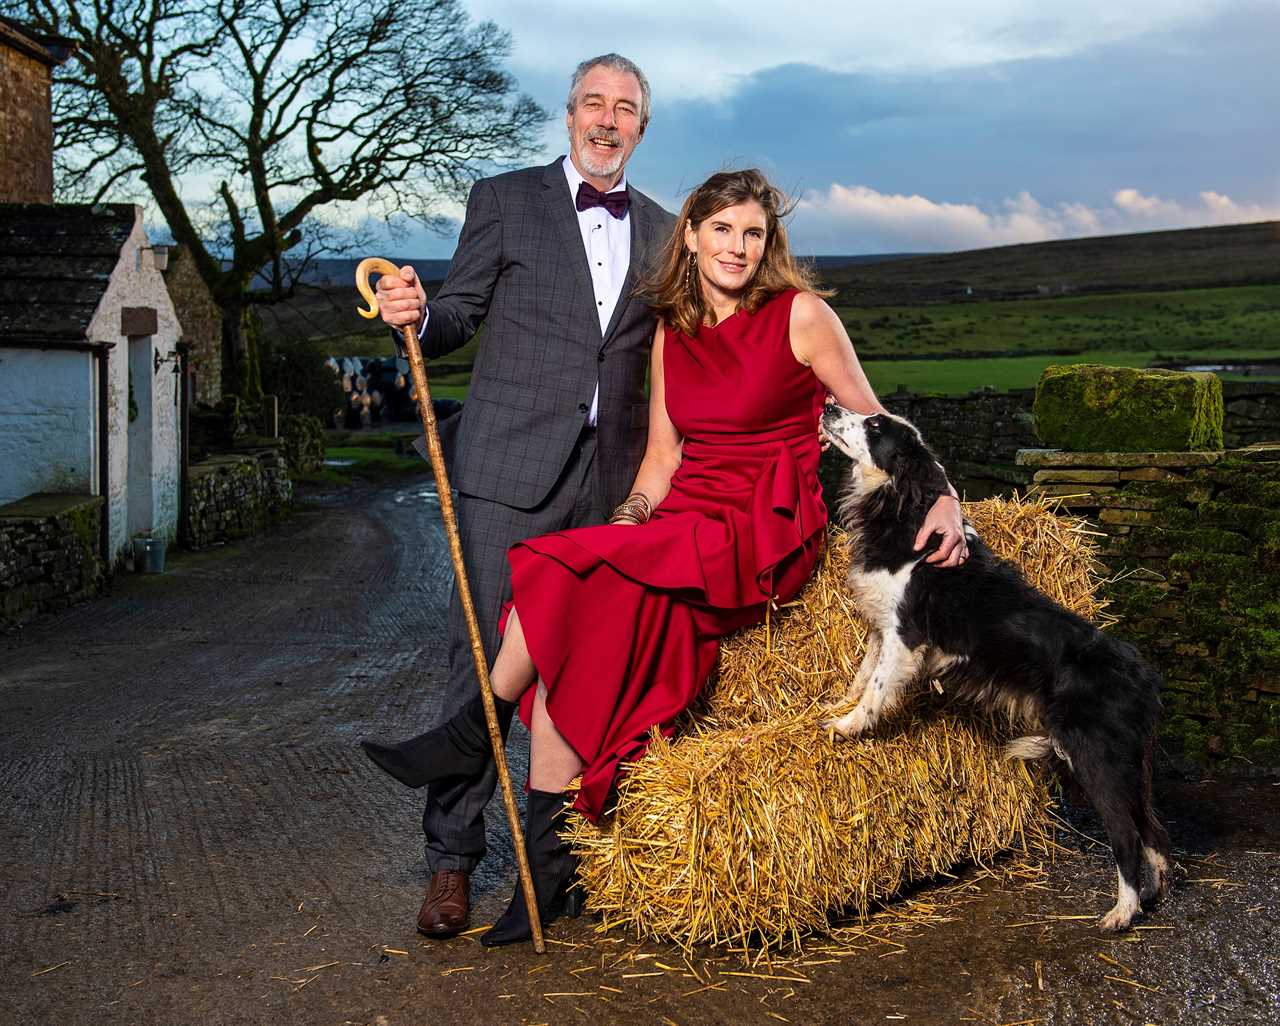 Yorkshire Farm’s Amanda Owen admits life is ‘never easy’ and is facing ‘new challenges’ after split from husband Clive